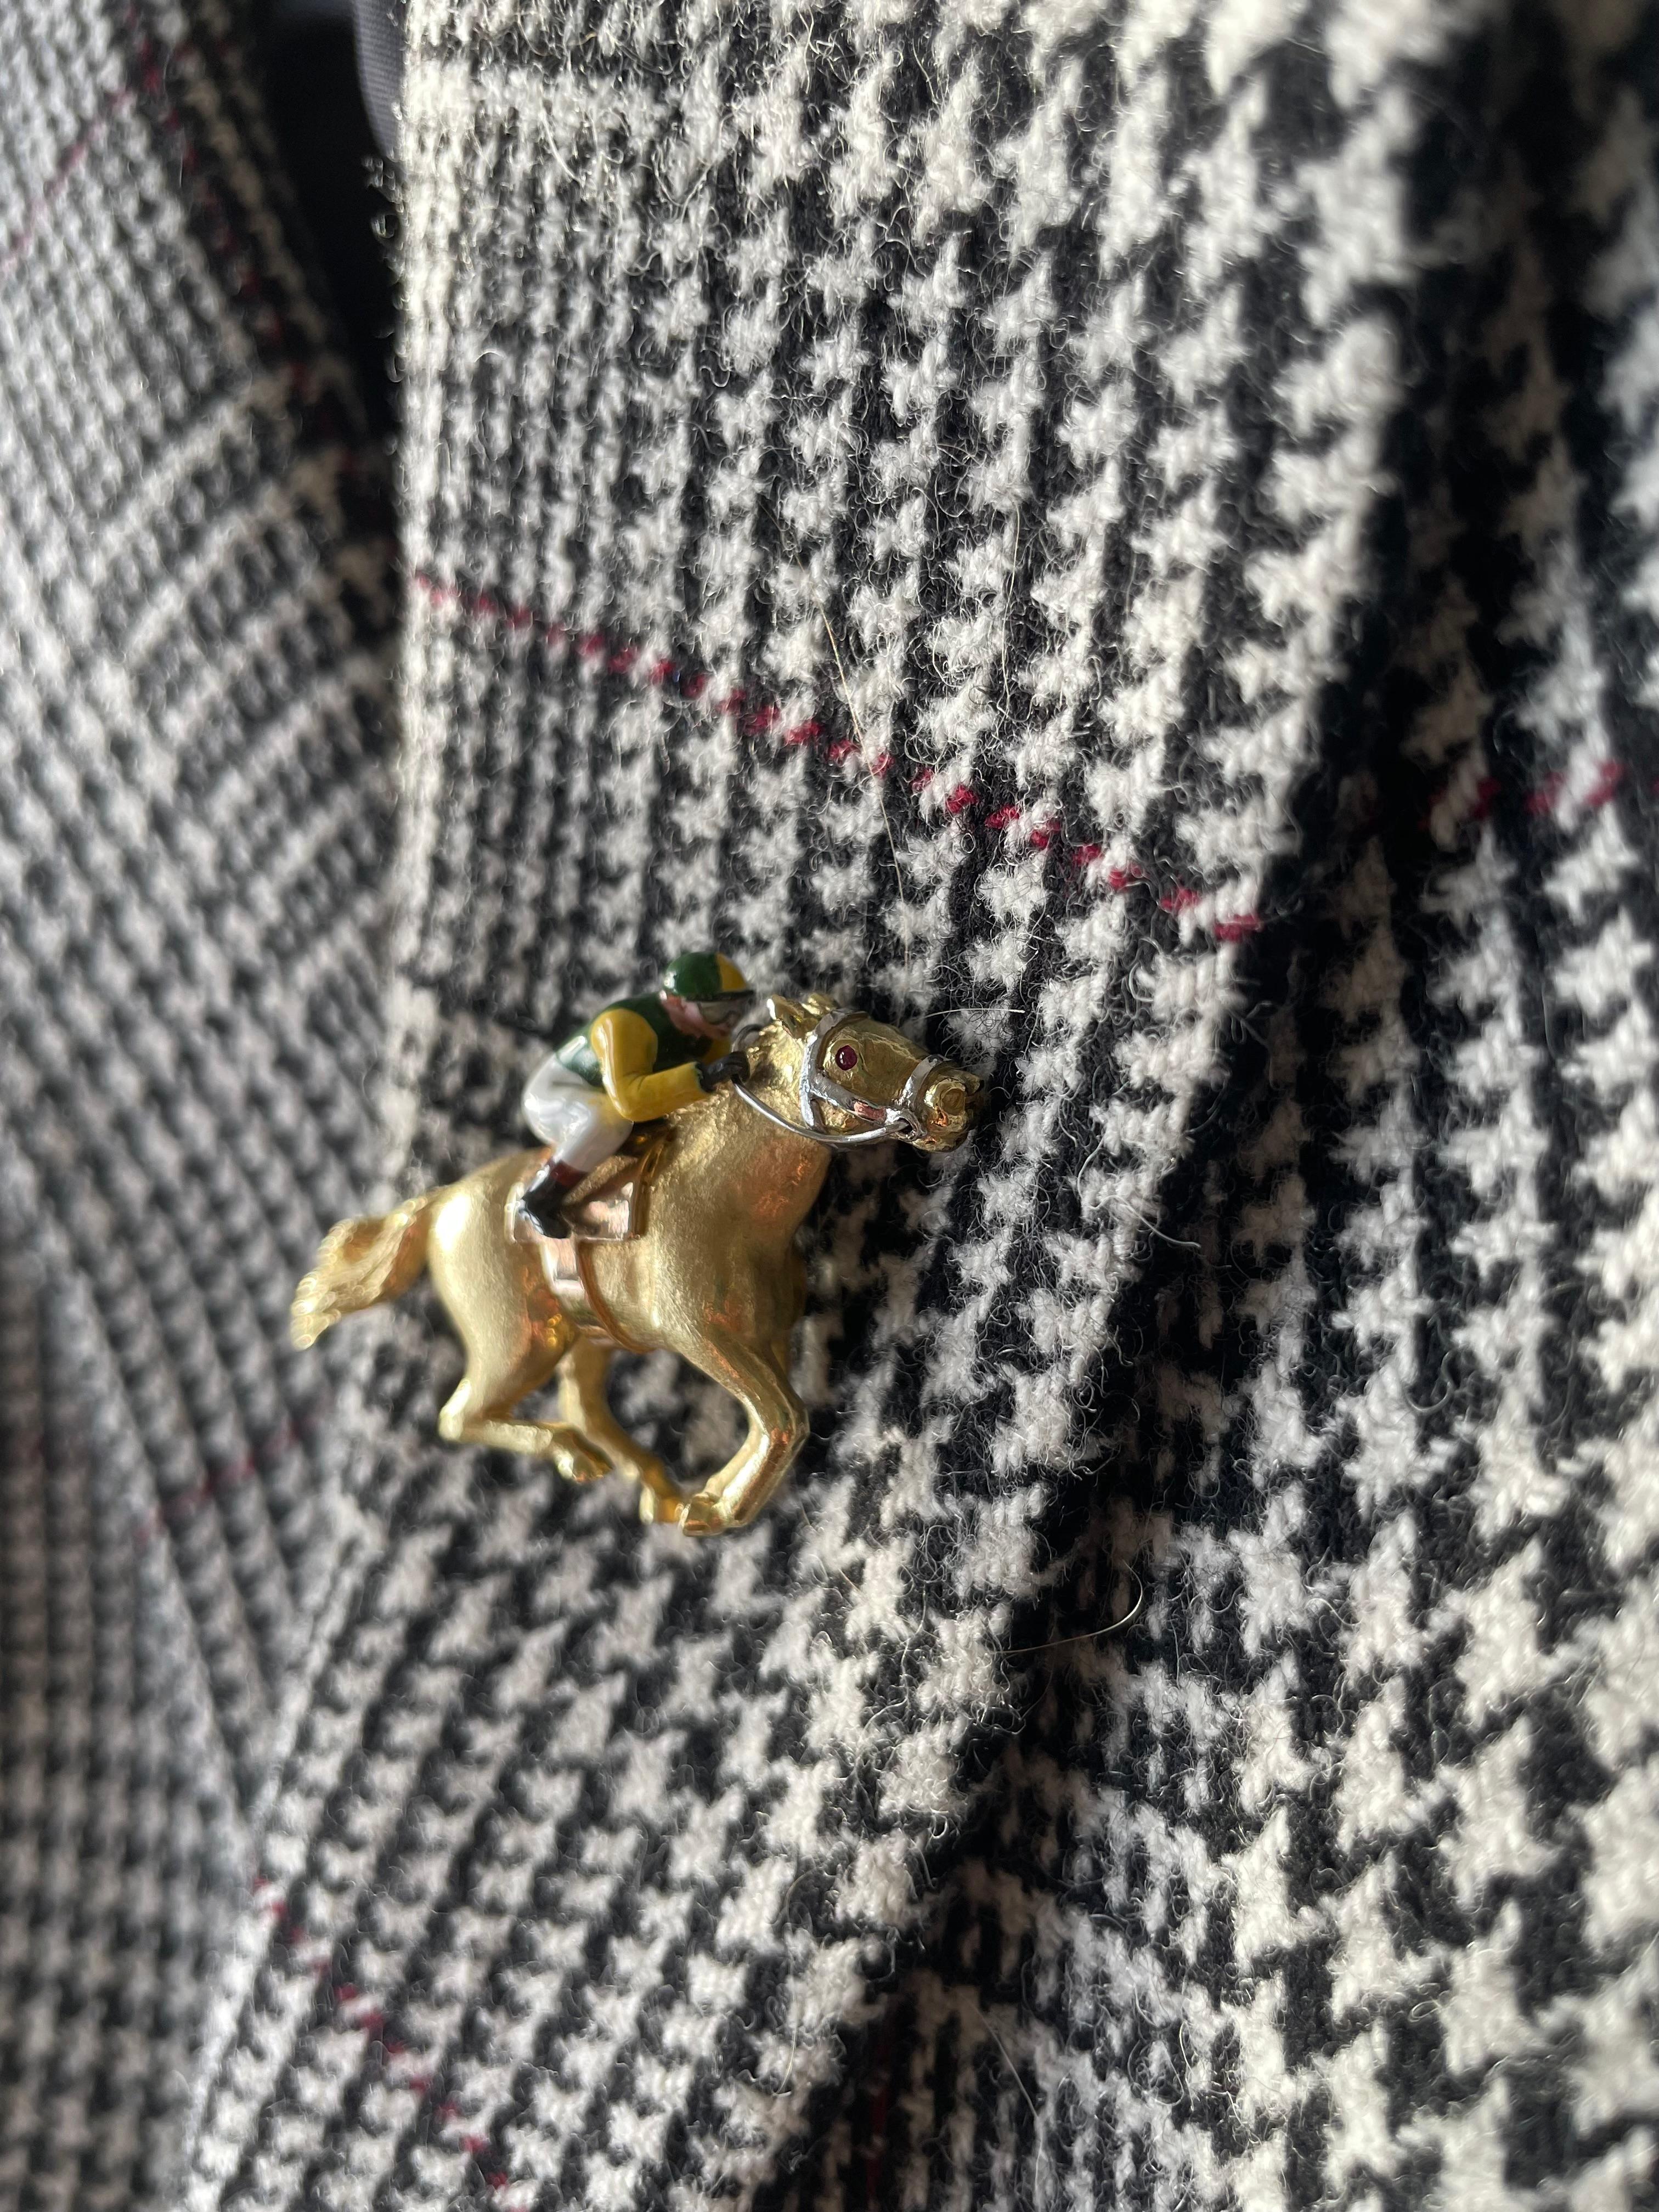 E Wolfe & Company handmade 18 carat yellow gold racehorse brooch. This brooch has been handmade with great attention to detail in our London Workshop. The brooch depicts a gold racehorse with cabochon ruby eye mid-stride being ridden by an enamelled